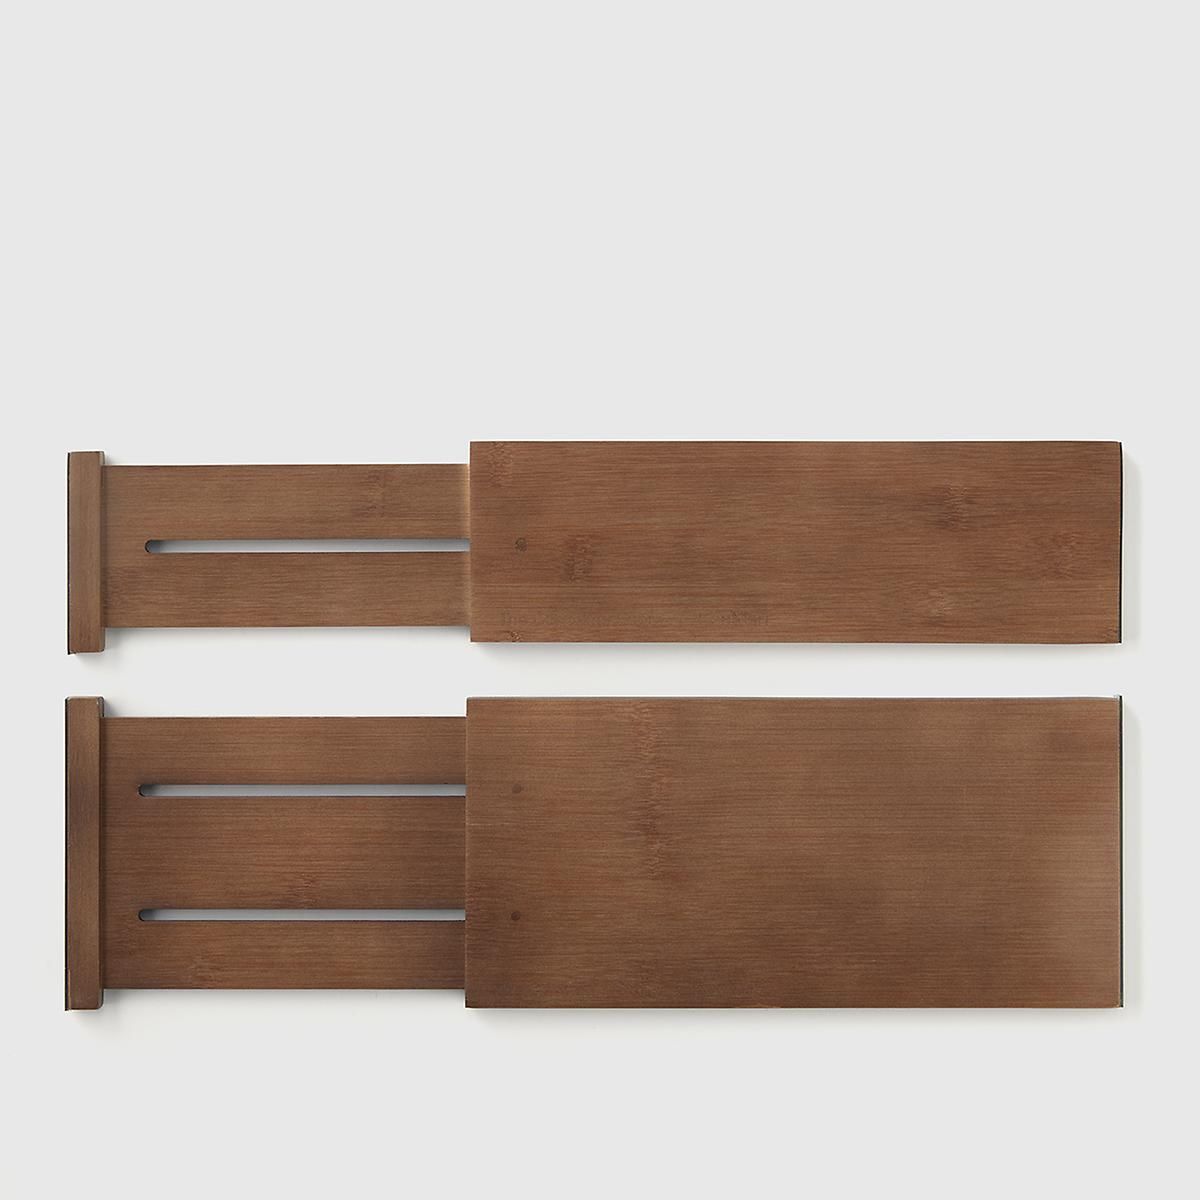 Marie Kondo Kocha Brown Bamboo Drawer Dividers Set of 2 | The Container Store